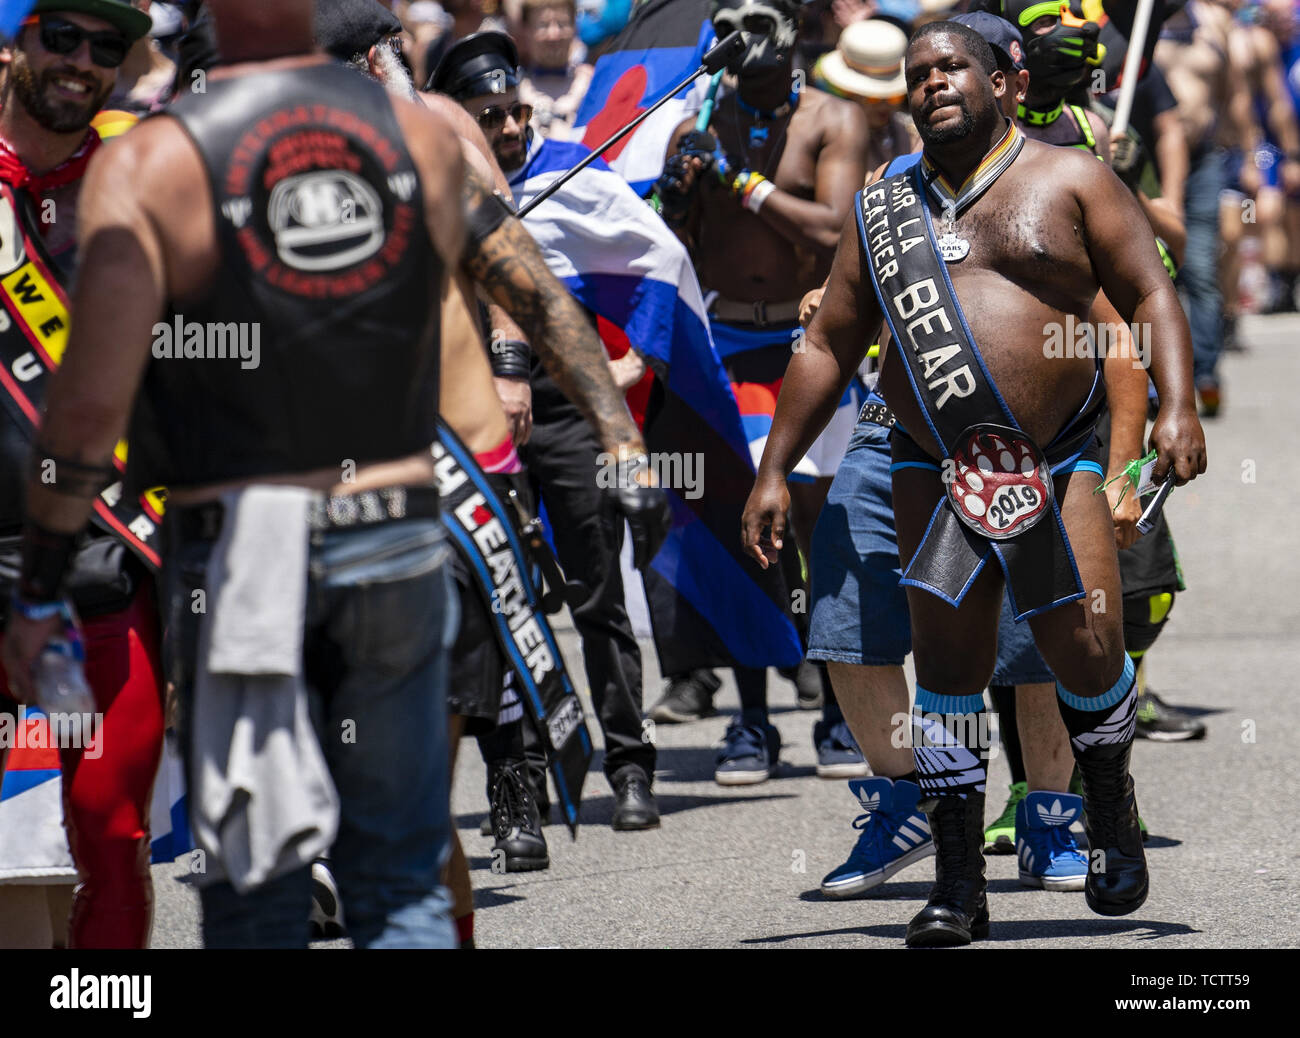 Los Angeles, California, USA. 15th Mar, 2019. A man wears a sash that says Mr. LA Leather Bear during the LA Pride Parade in West Hollywood, California.The 49th annual gay pride parade includes a music festival and a parade that draws large crowds. Credit: Ronen Tivony/SOPA Images/ZUMA Wire/Alamy Live News Stock Photo